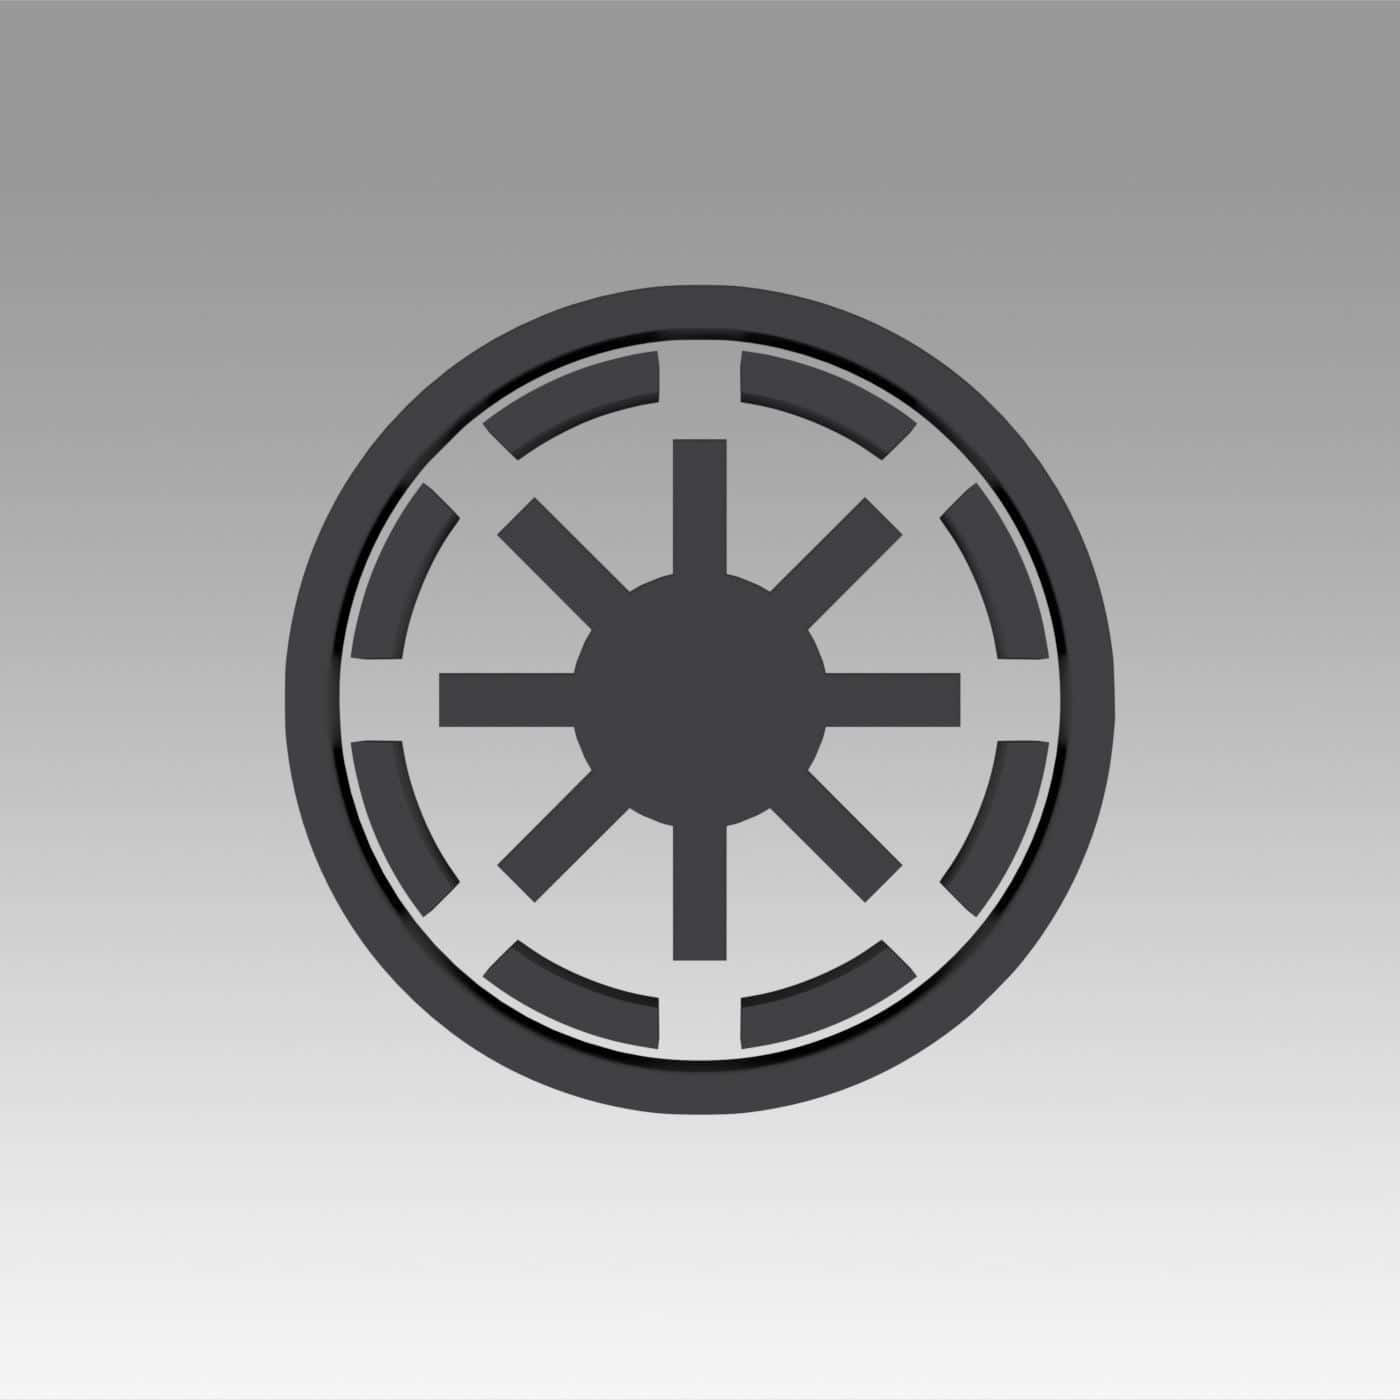 The official logo of the Galactic Empire from the Star Wars franchise. Wallpaper